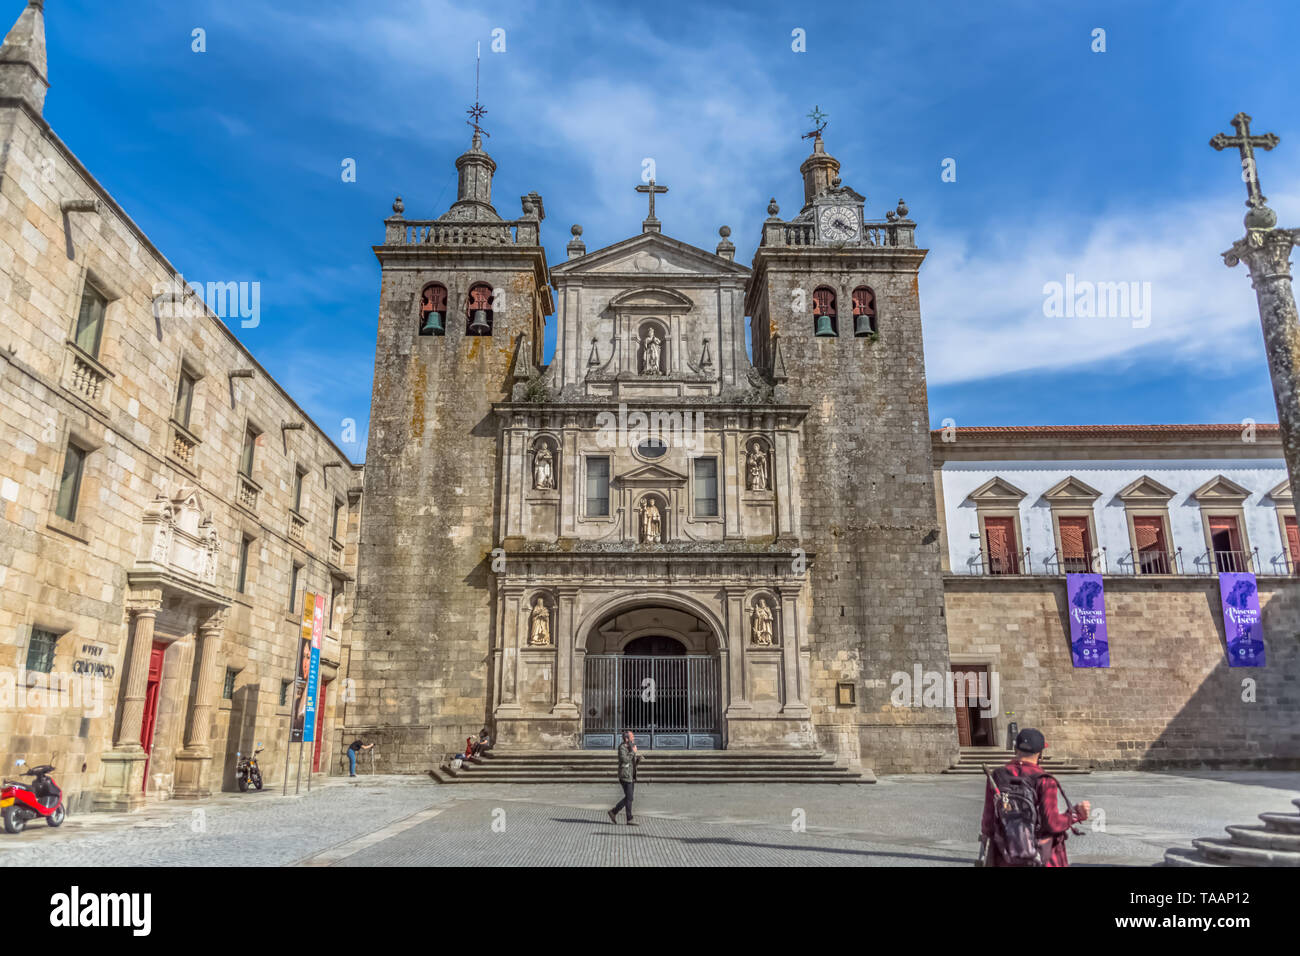 Viseu / Portugal - 04 16 2019 : View at the front facade of the Cathedral of Viseu, Adro da Sé Cathedral de Viseu, tourist people, architectural icon  Stock Photo